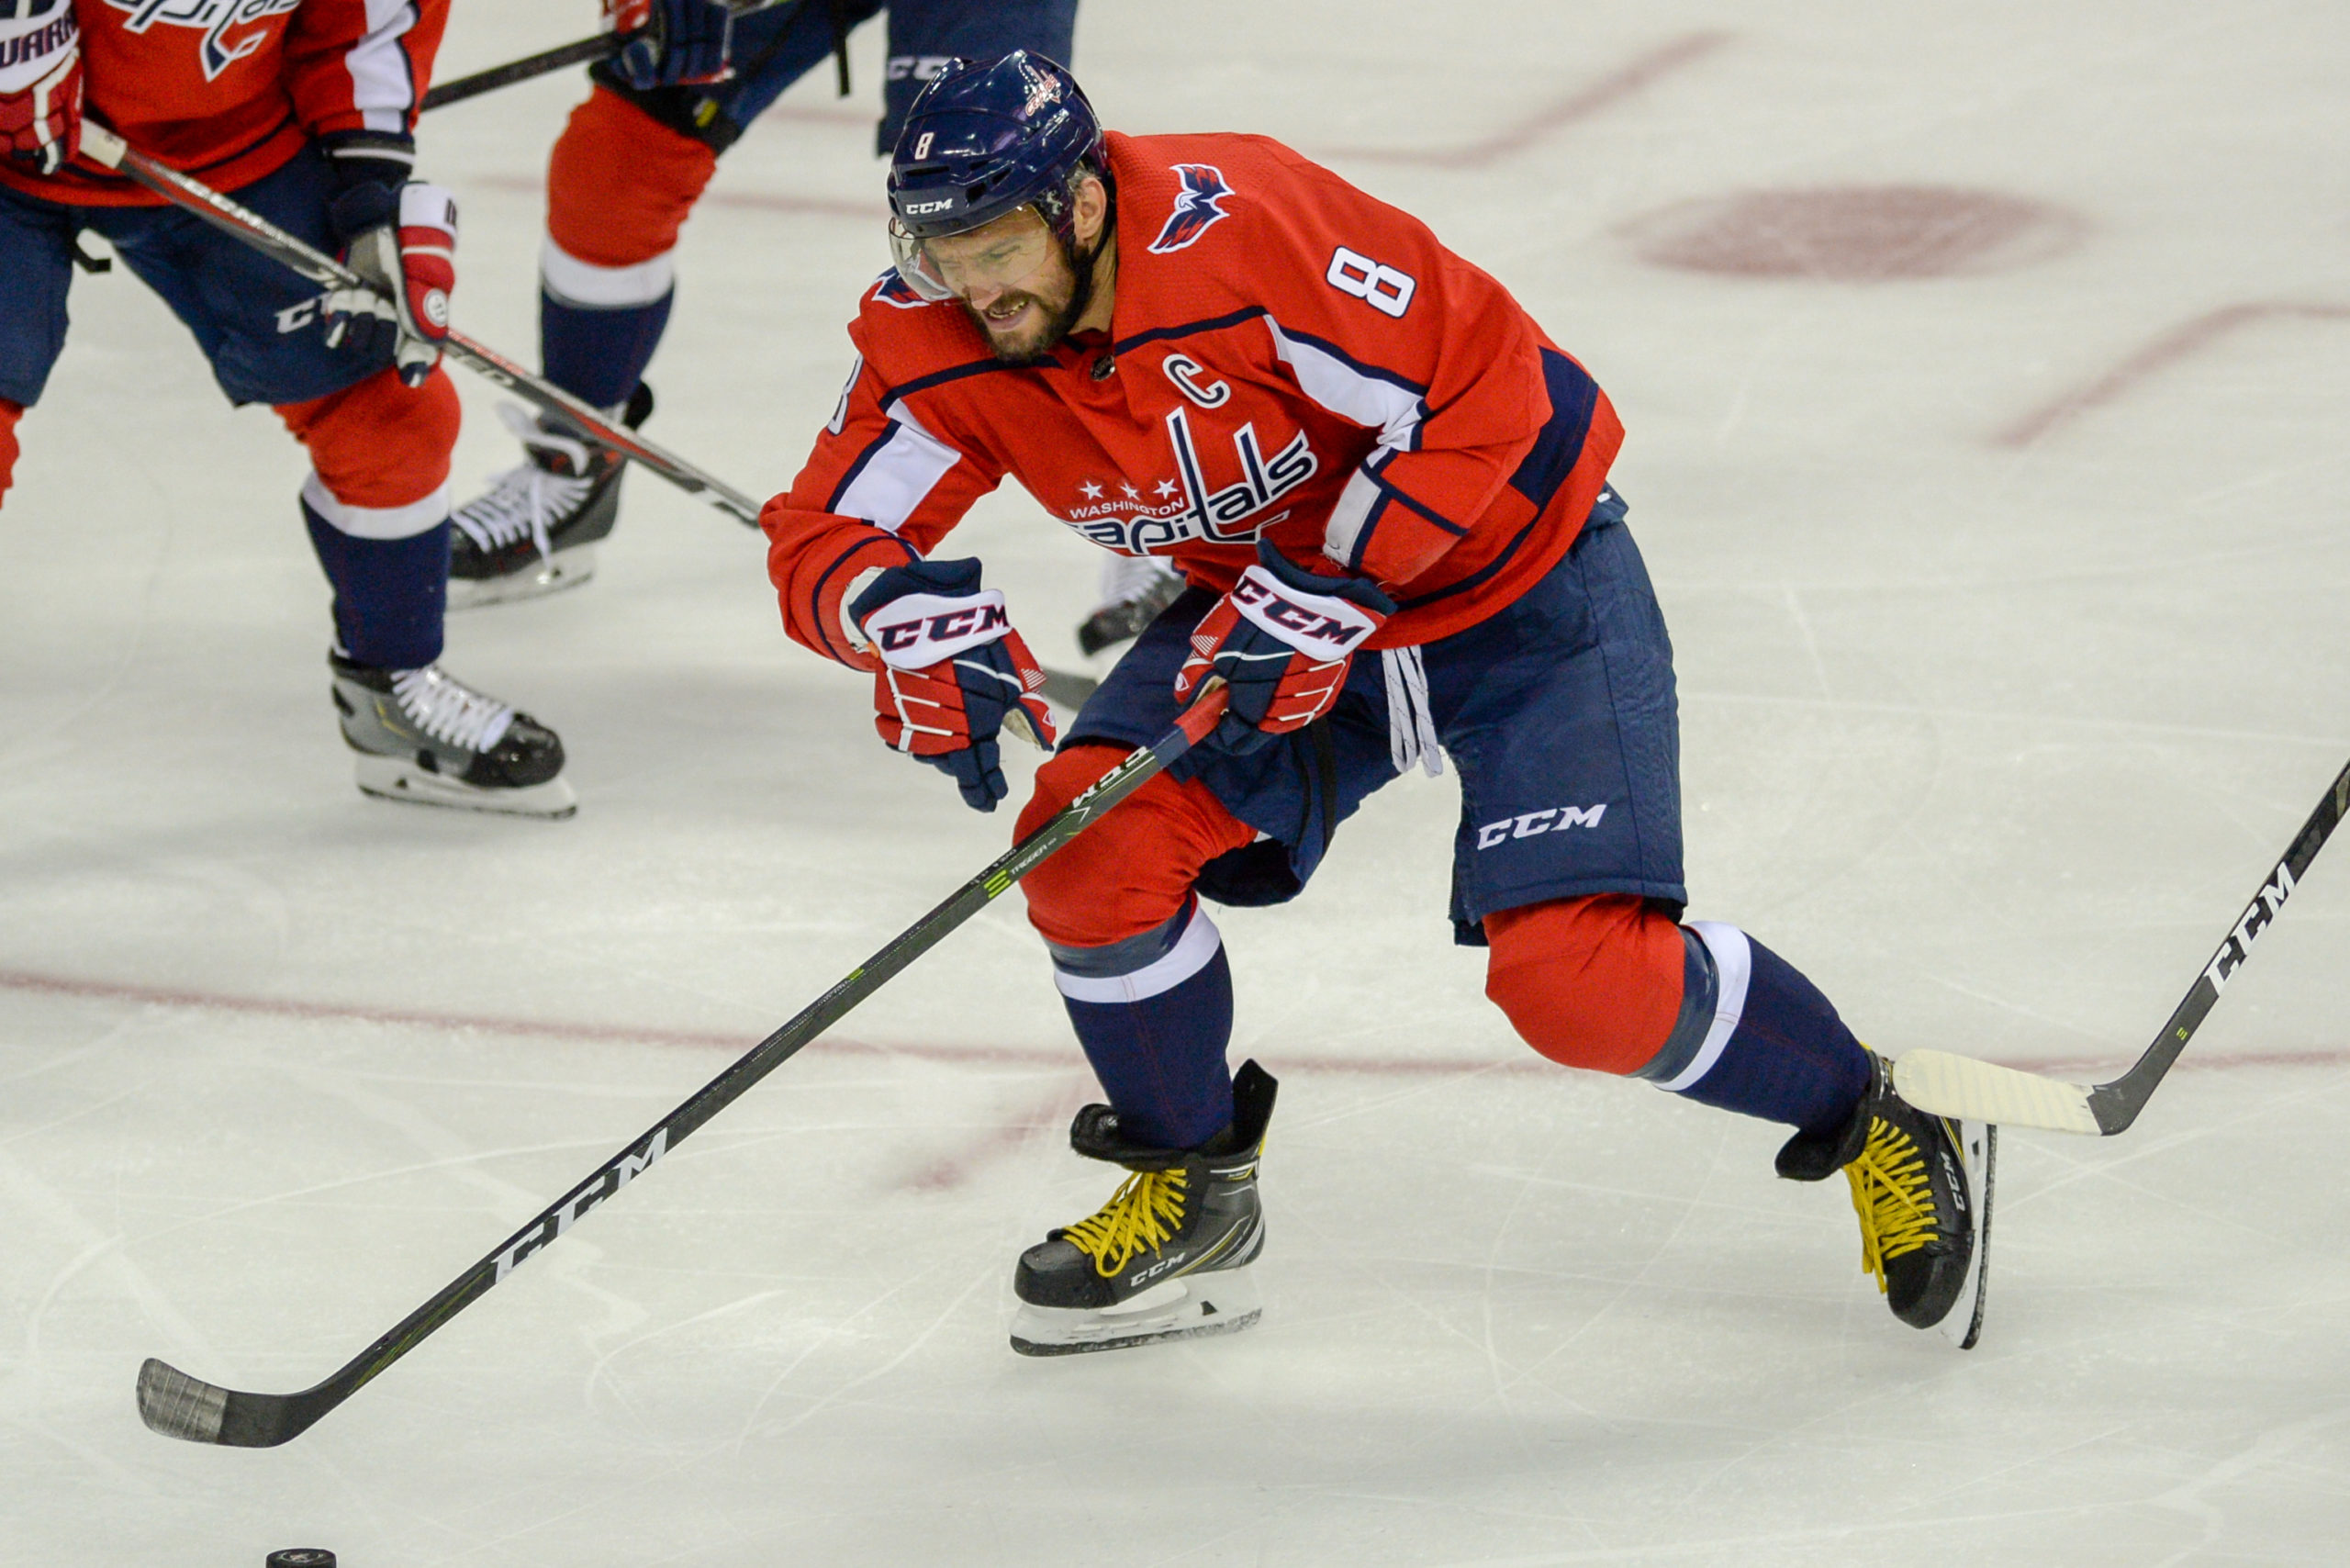 The Capitals re-signed Alex Ovechkin in a relatively quiet offseason for the team.